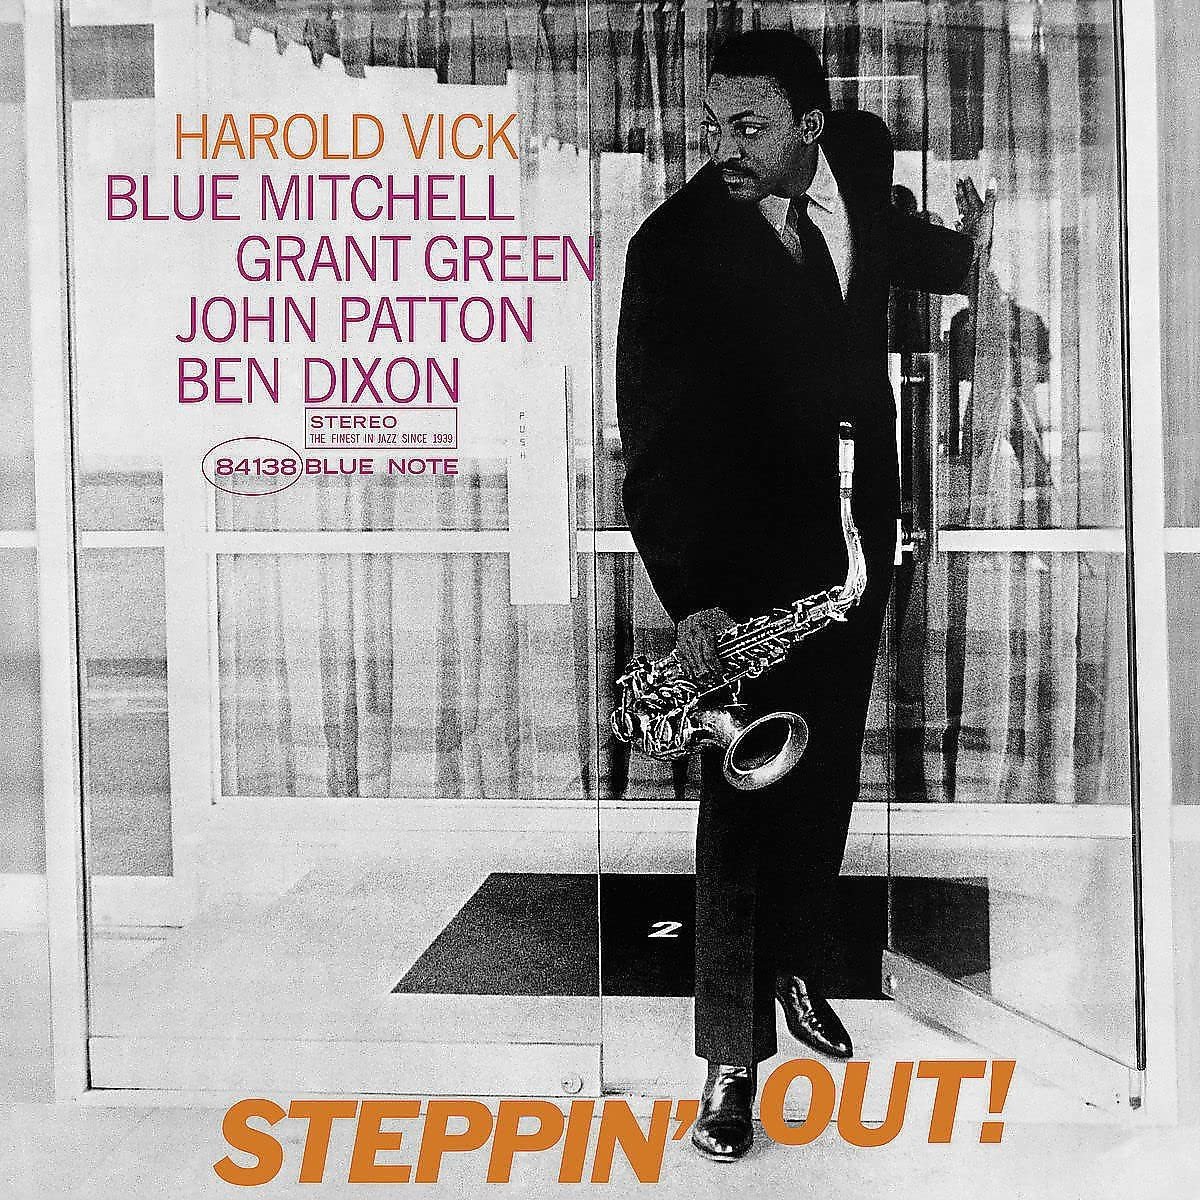 Harold Vick - Steppin' Out! (Tone Poet Series) (LP)